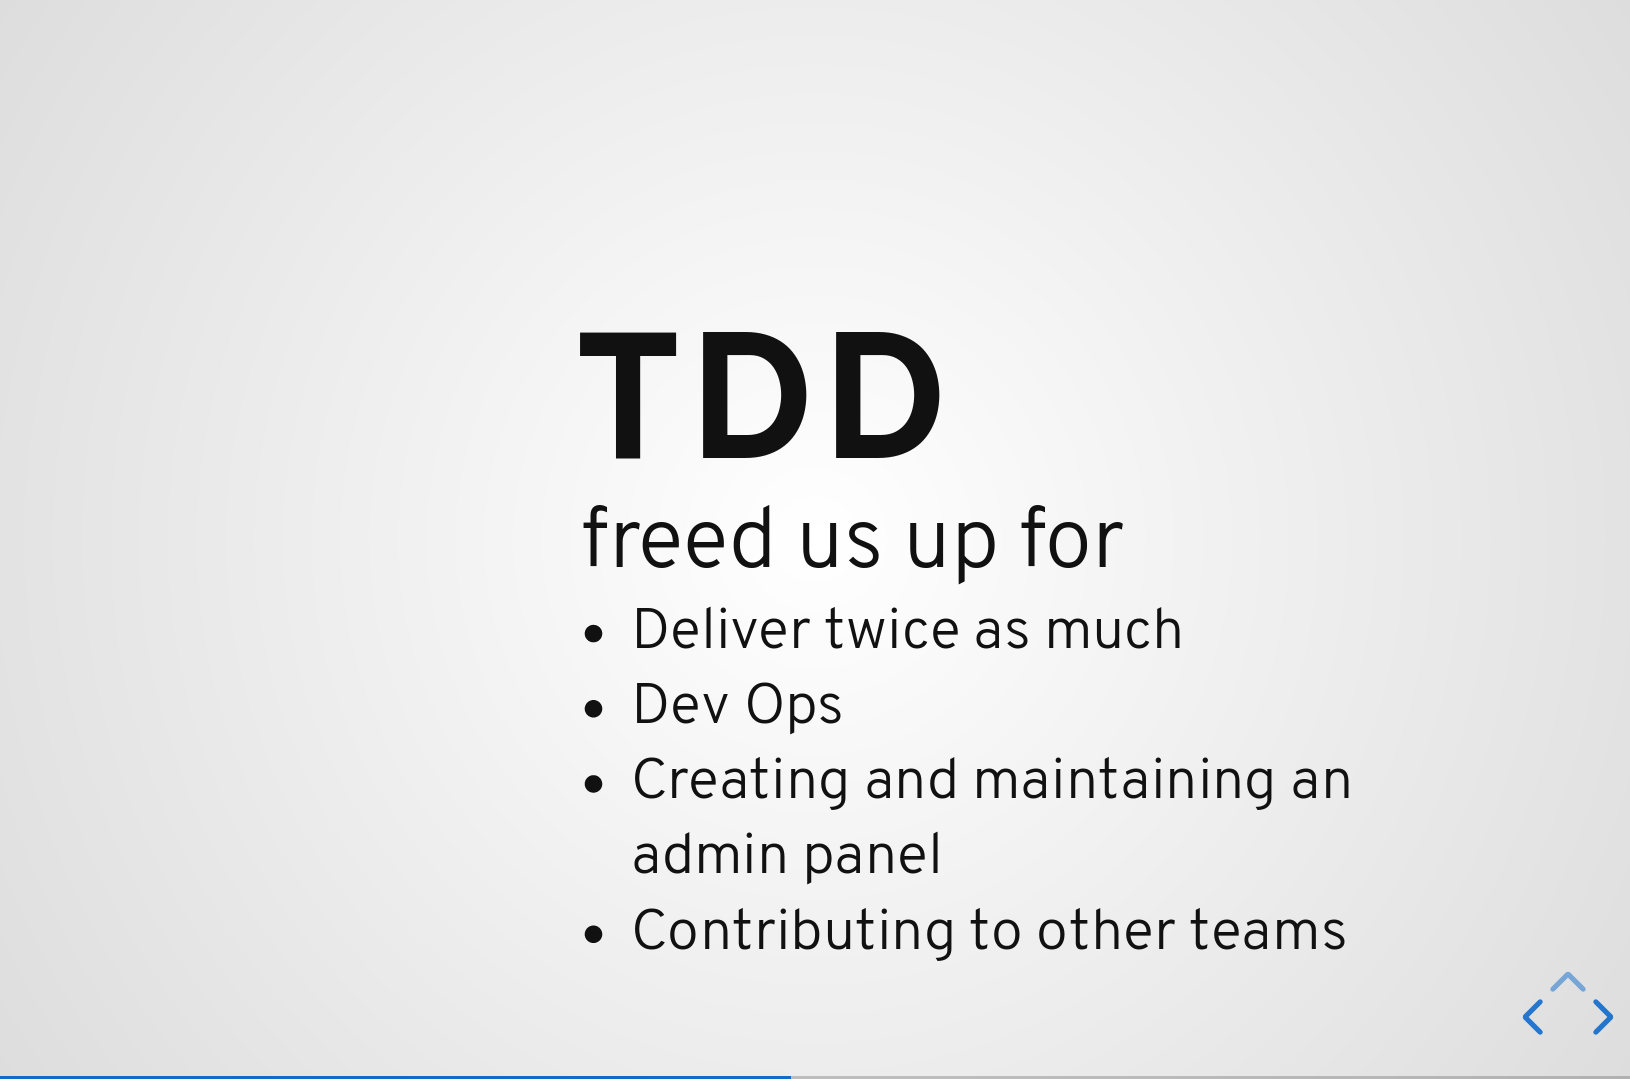 TDD gave us time to invest elsewhere